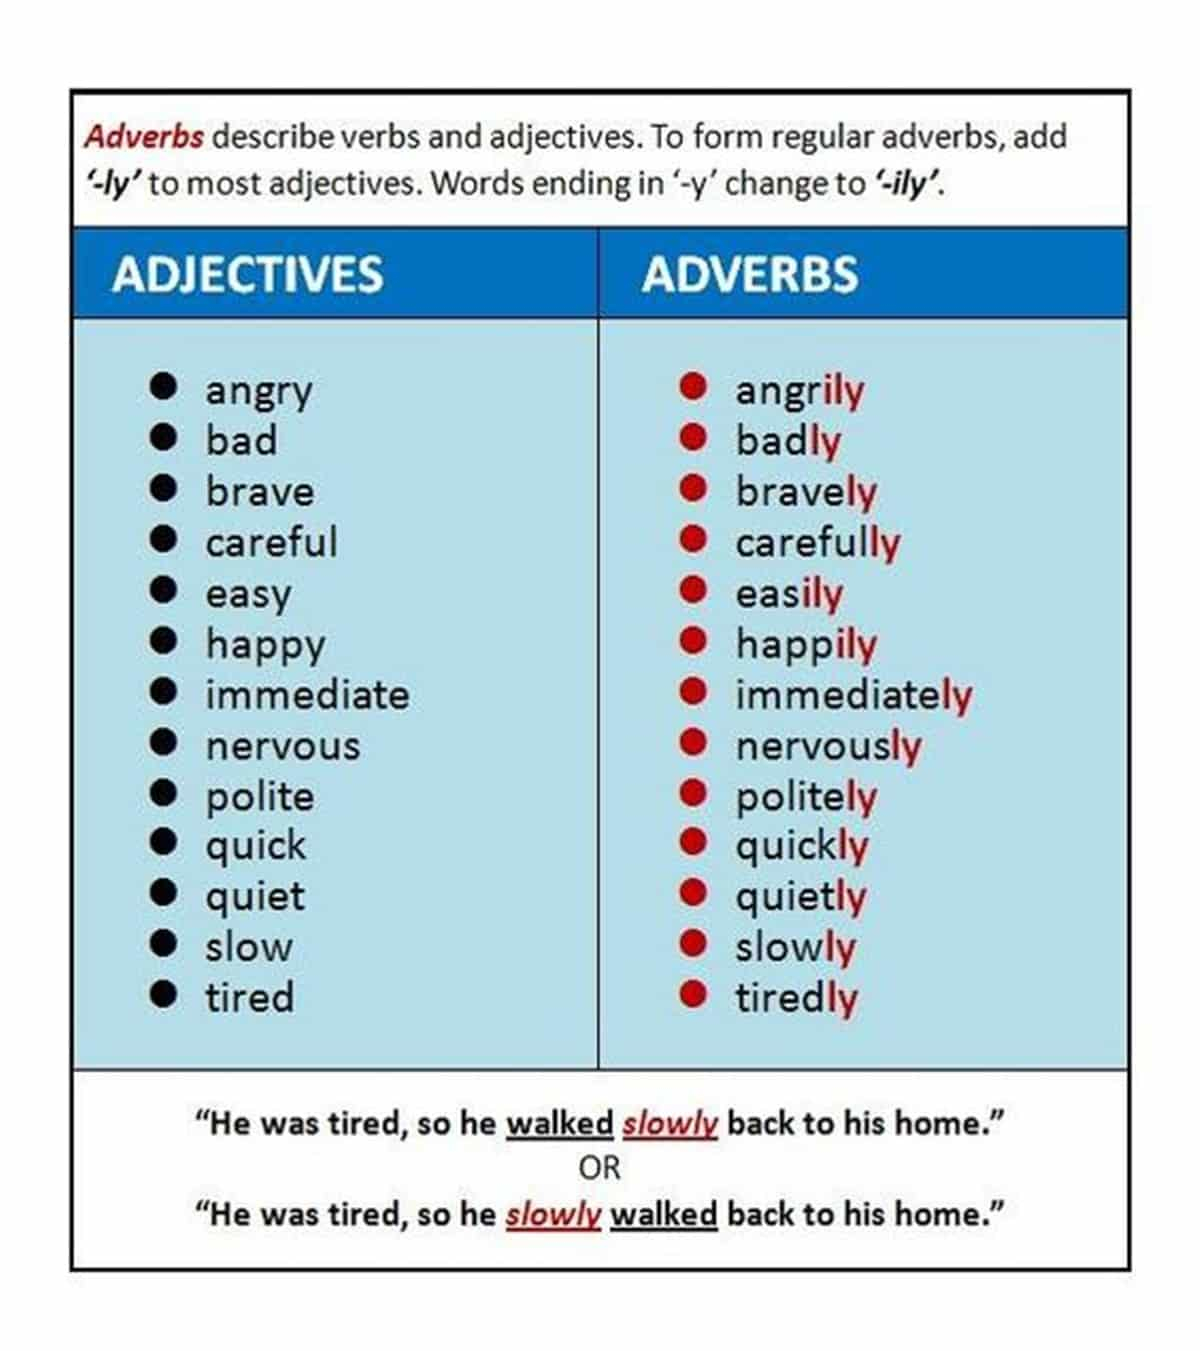 English Grammar Forming Adverbs From Adjectives ESLBUZZ